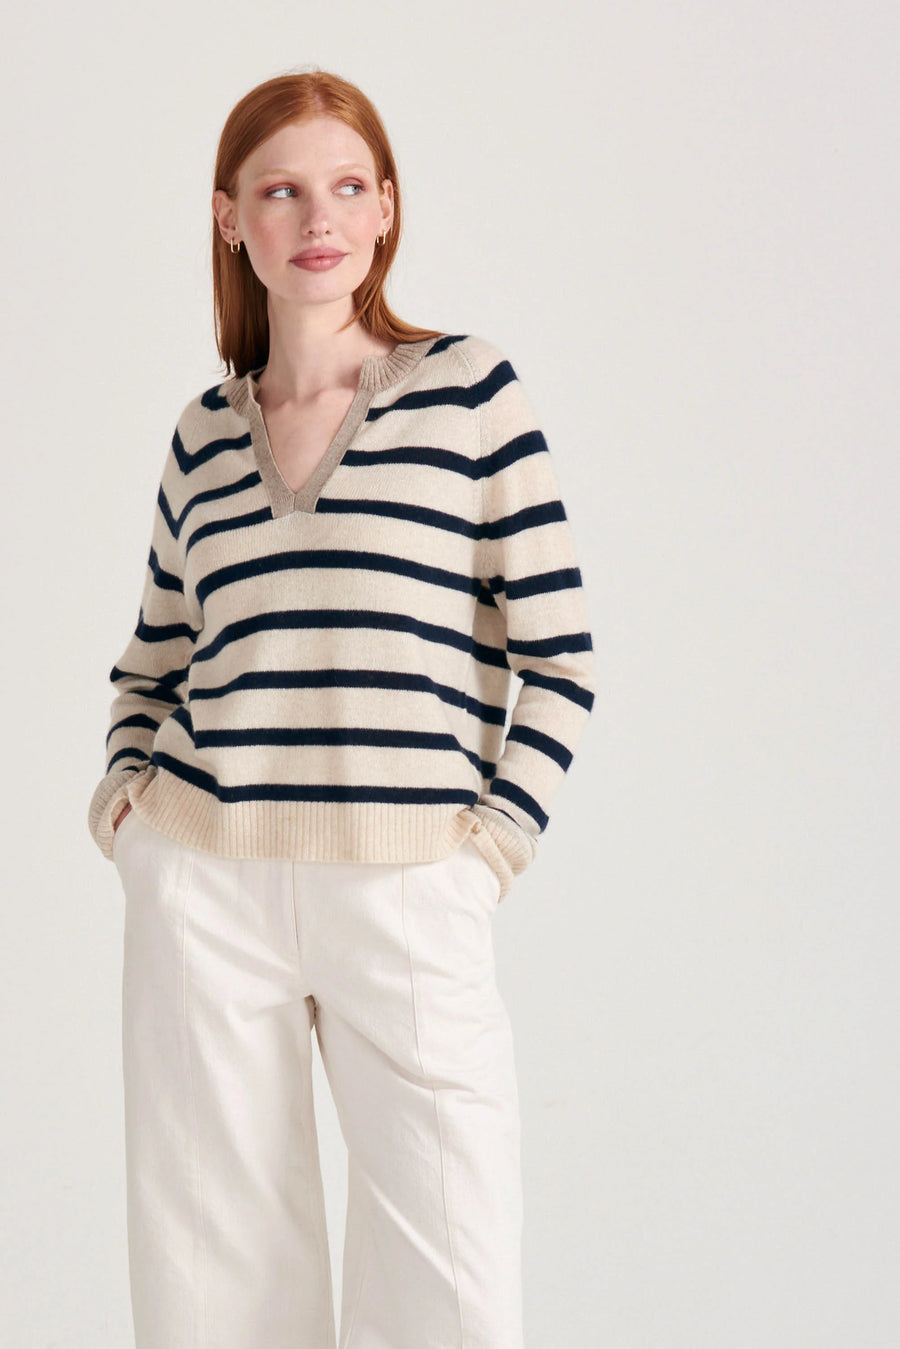 JUMPER 1234 CASHMERE STRIPE OPEN COLLAR IN OATMEAL AND NAVY